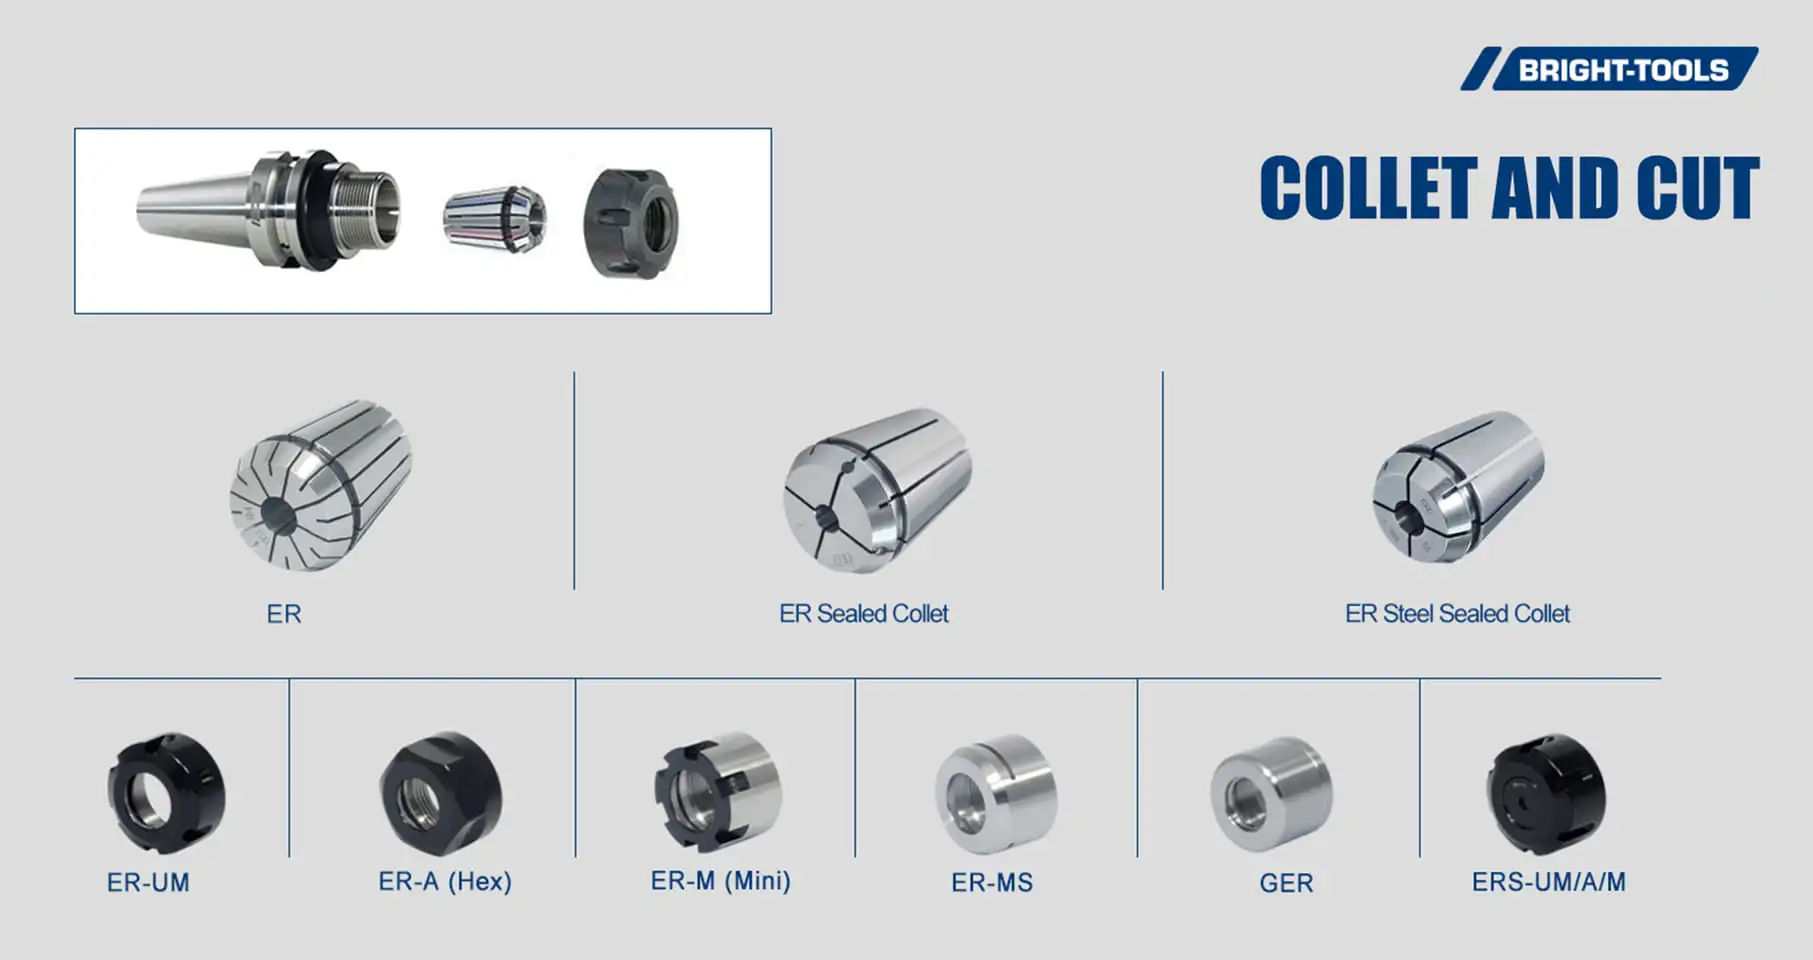 Collet And Cut Of Bt Holder